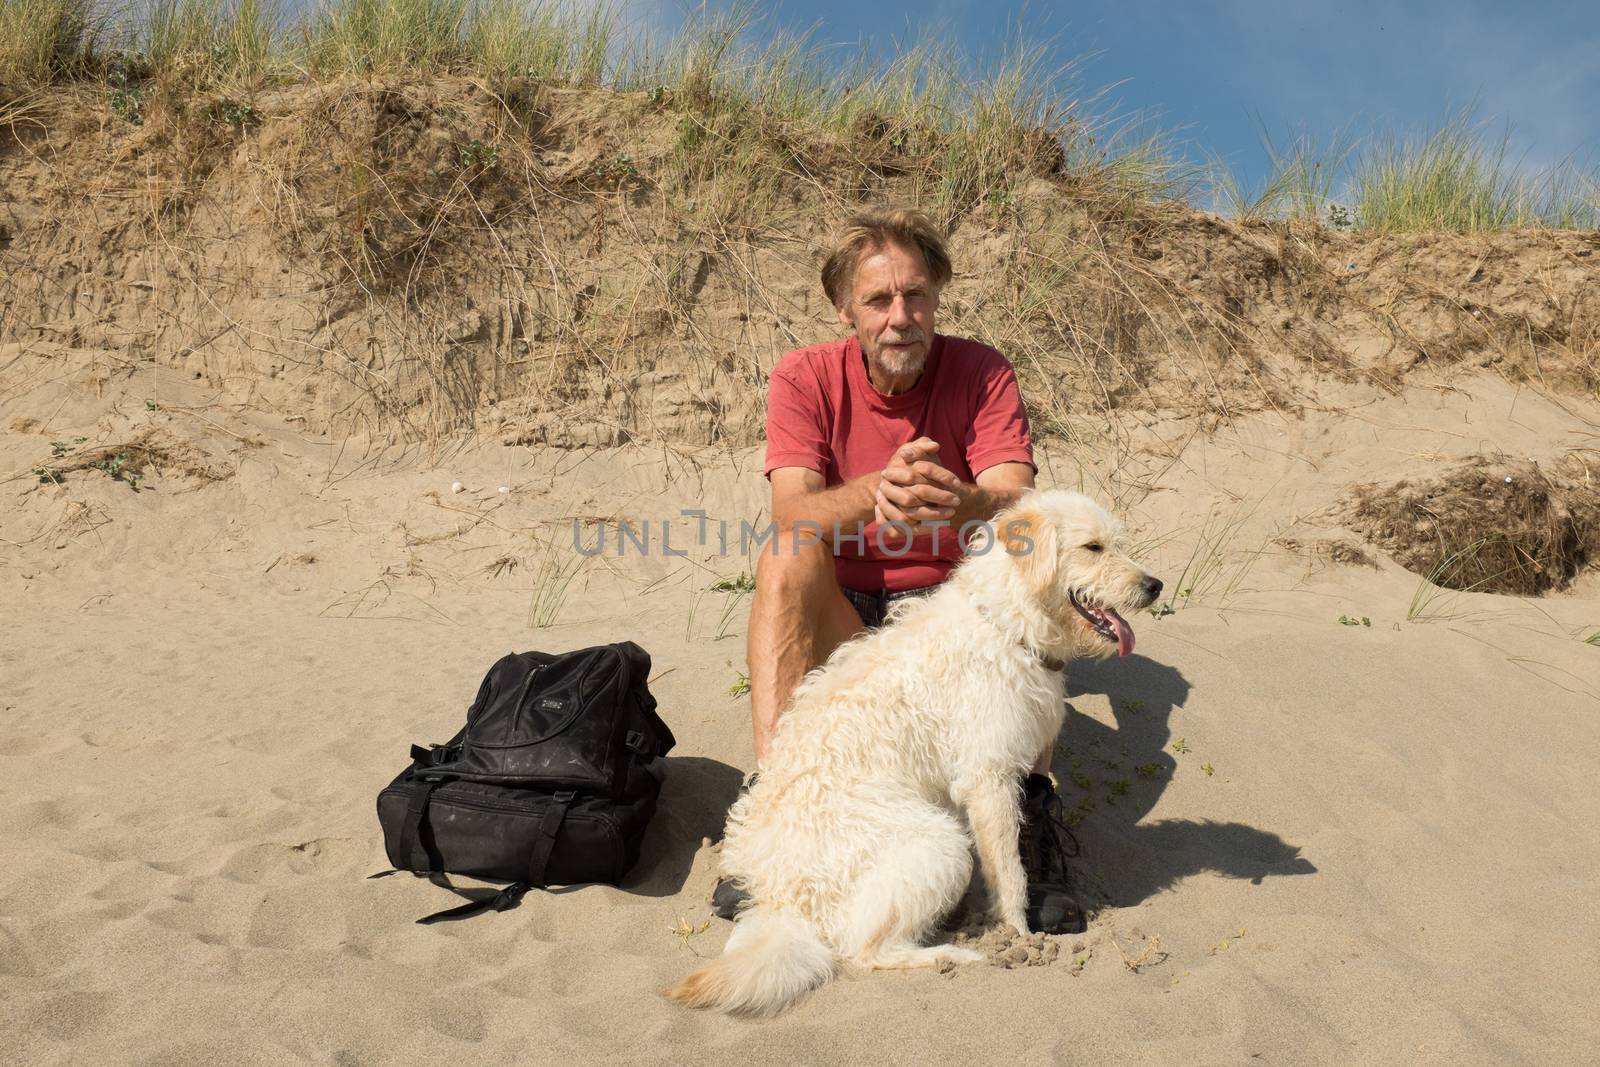 Man and dog on beach. by richsouthwales